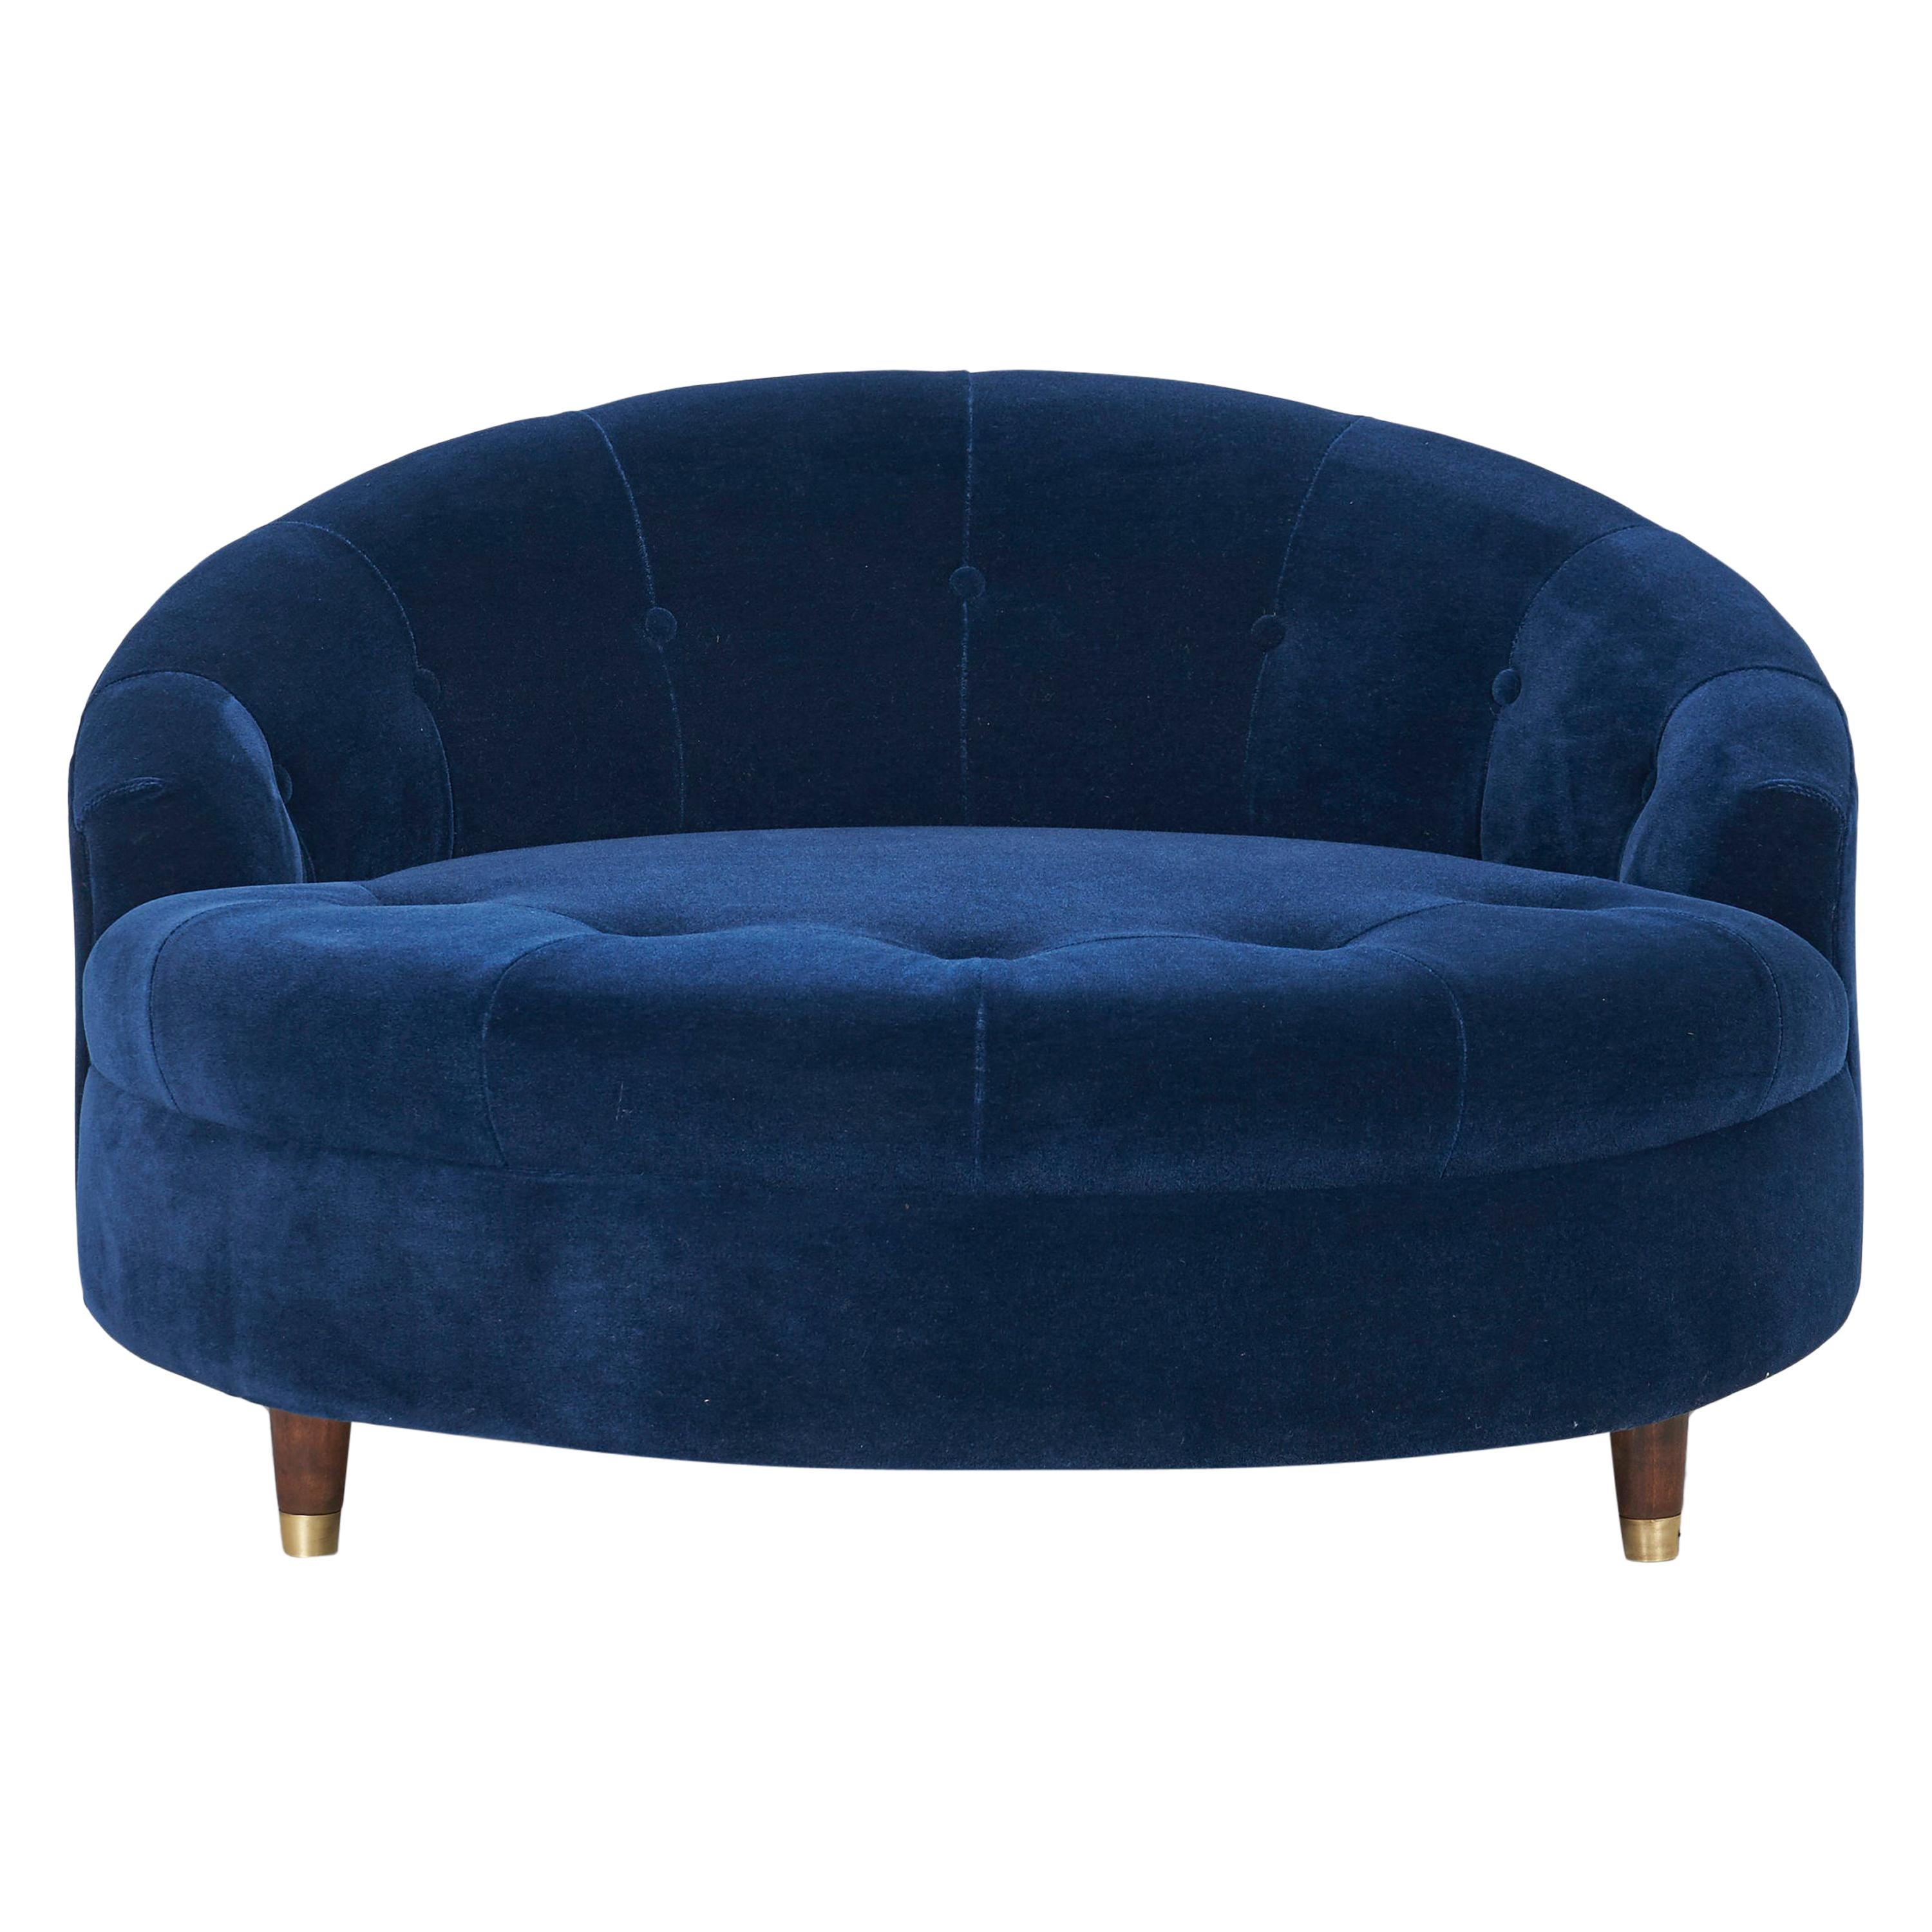 Adrian Pearsall Round Chaise